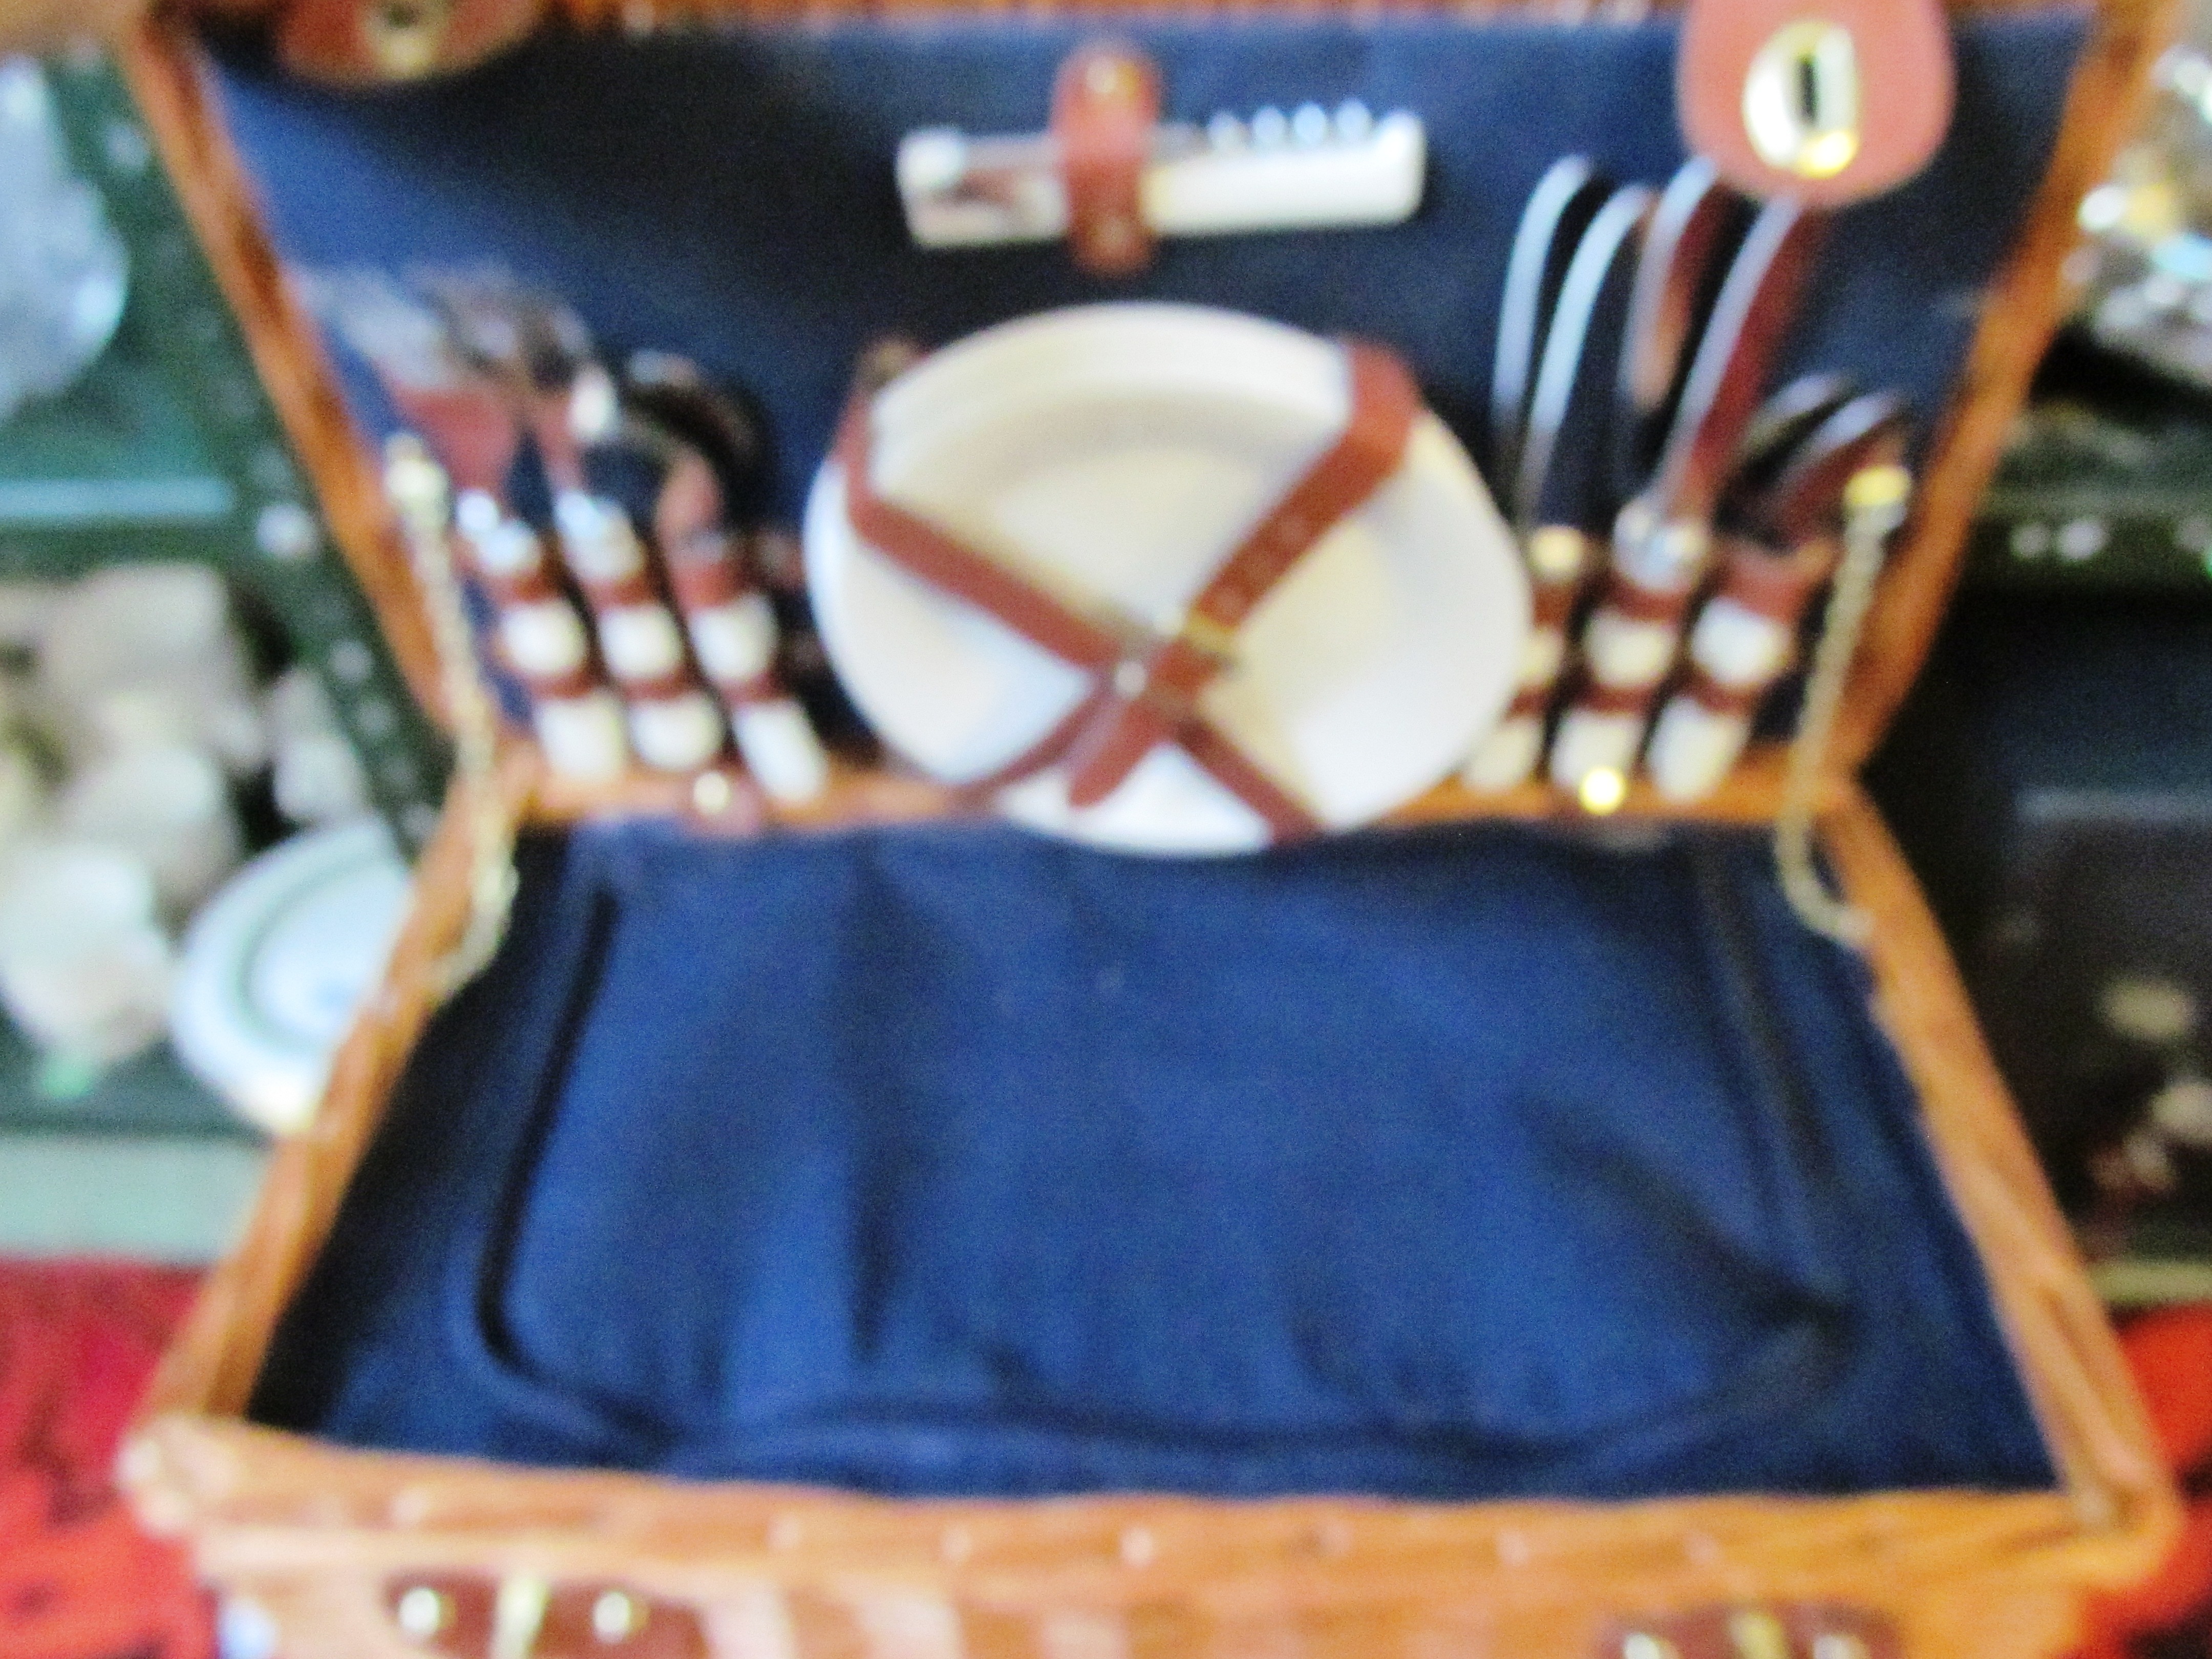 A Wicker picnic hamper fitted with cutlery, glasses, etc. - Image 2 of 2